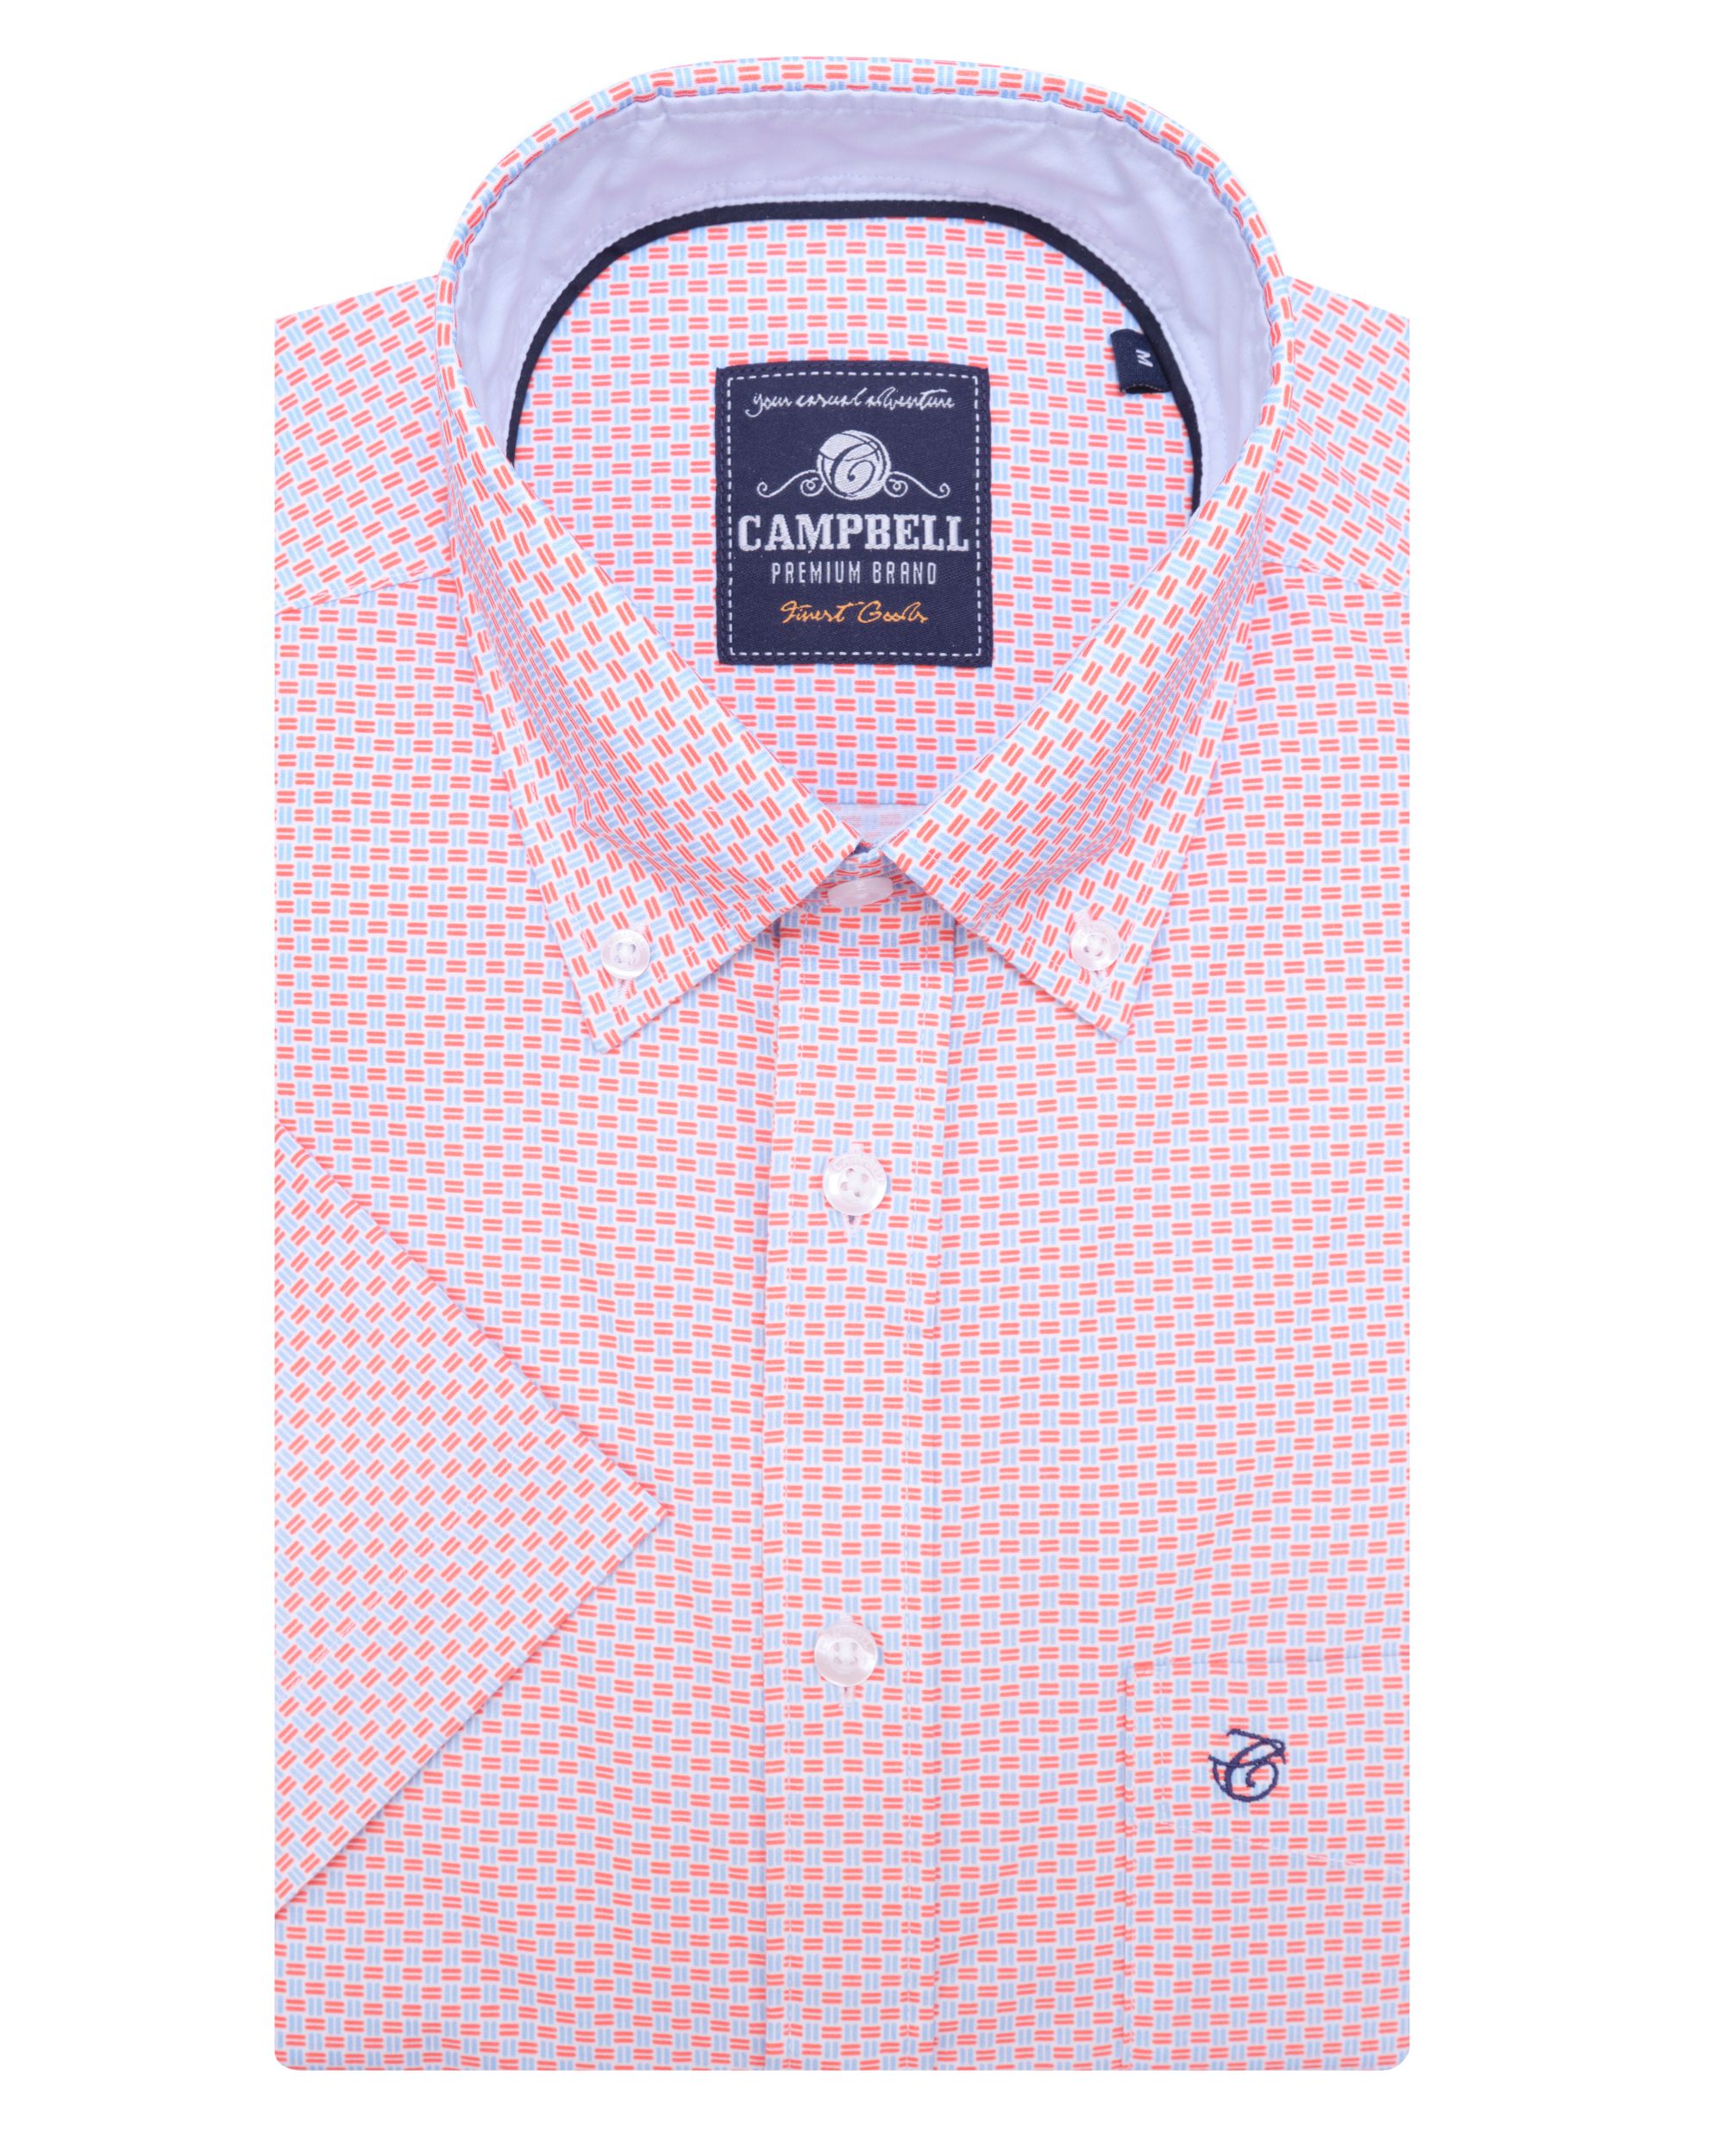 Campbell Classic Casual Overhemd KM Lichtrood dessin 081472-002-L